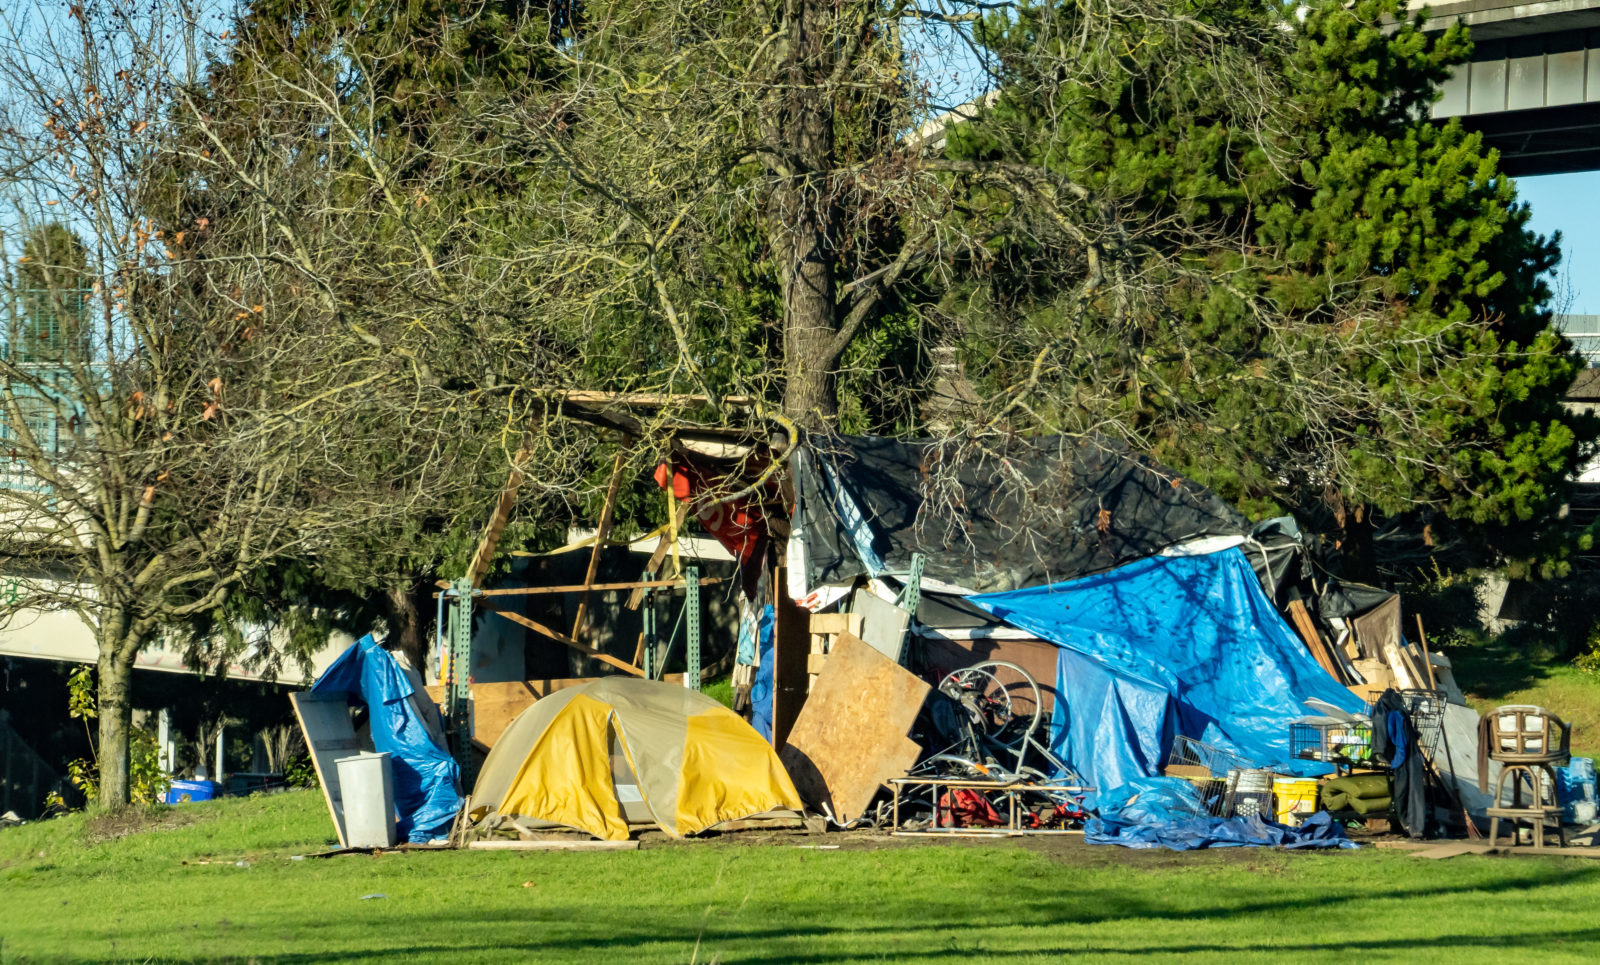 A homeless people camp at the base of a bridge over the Willamette River in Portland Oregon